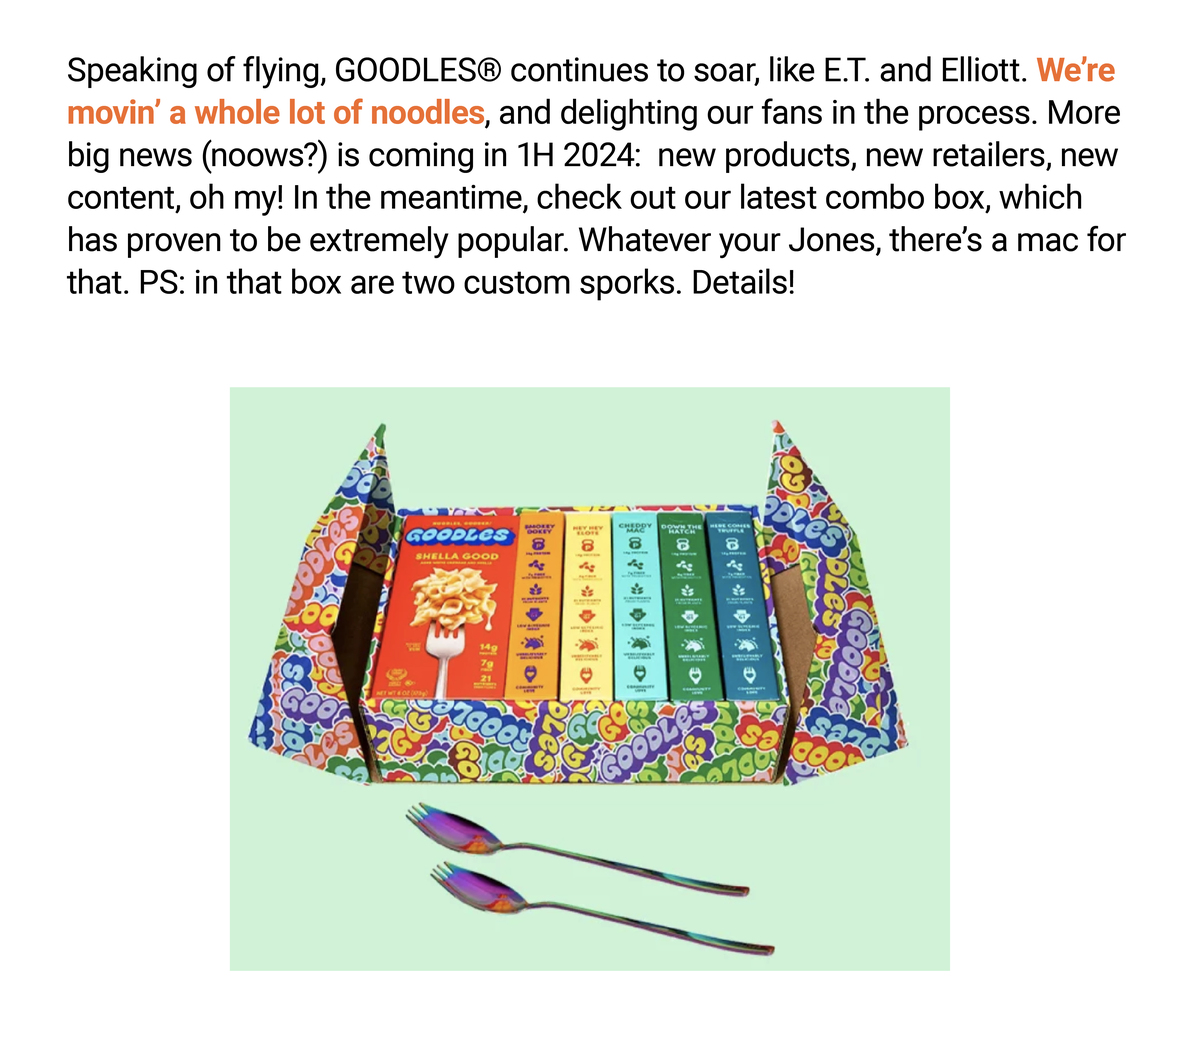 The image features a text overlay and a photo of a colorful mac and cheese product called GOODLES. The text reads: "Speaking of flying, GOODLES® continues to soar, like E.T. and Elliott. We're movin' a whole lot of noodles, and delighting our fans in the process. More big news (noows?) is coming in 1H 2024: new products, new retailers, new content, oh my! In the meantime, check out our latest combo box, which has proven to be extremely popular. Whatever your Jones, there’s a mac for that. PS: in that box are two custom sporks. Details!"

Below the text, the GOODLES mac and cheese box is opened to reveal several different flavor packets. Two customized sporks with purple and blue handles are also shown in front of the box. The background is a soft mint green.